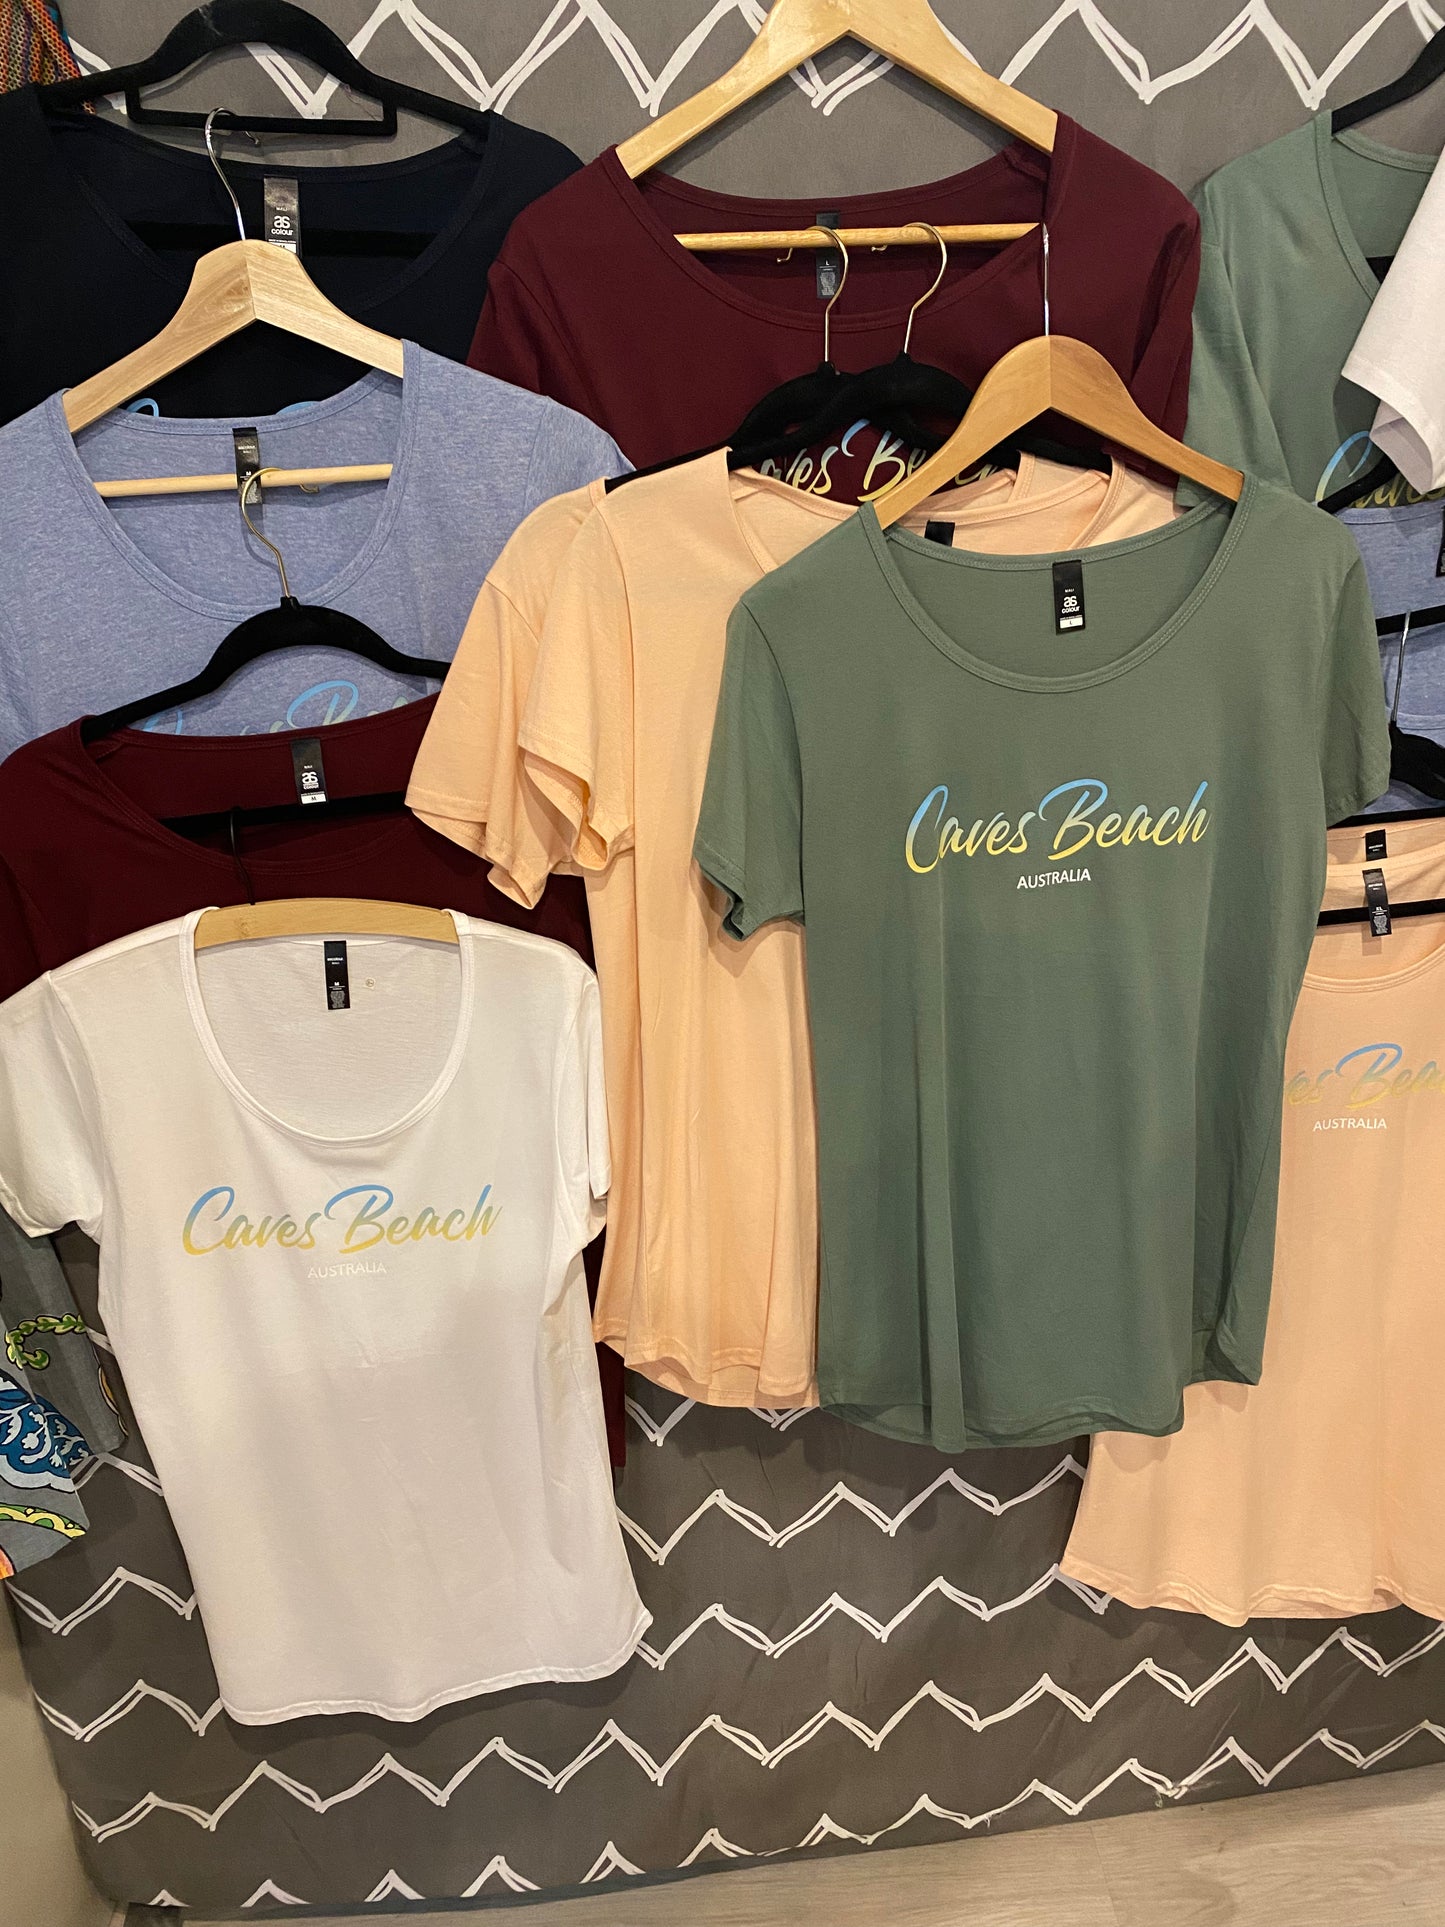 caves beach australia printed t-shirts on a hanger in various colors